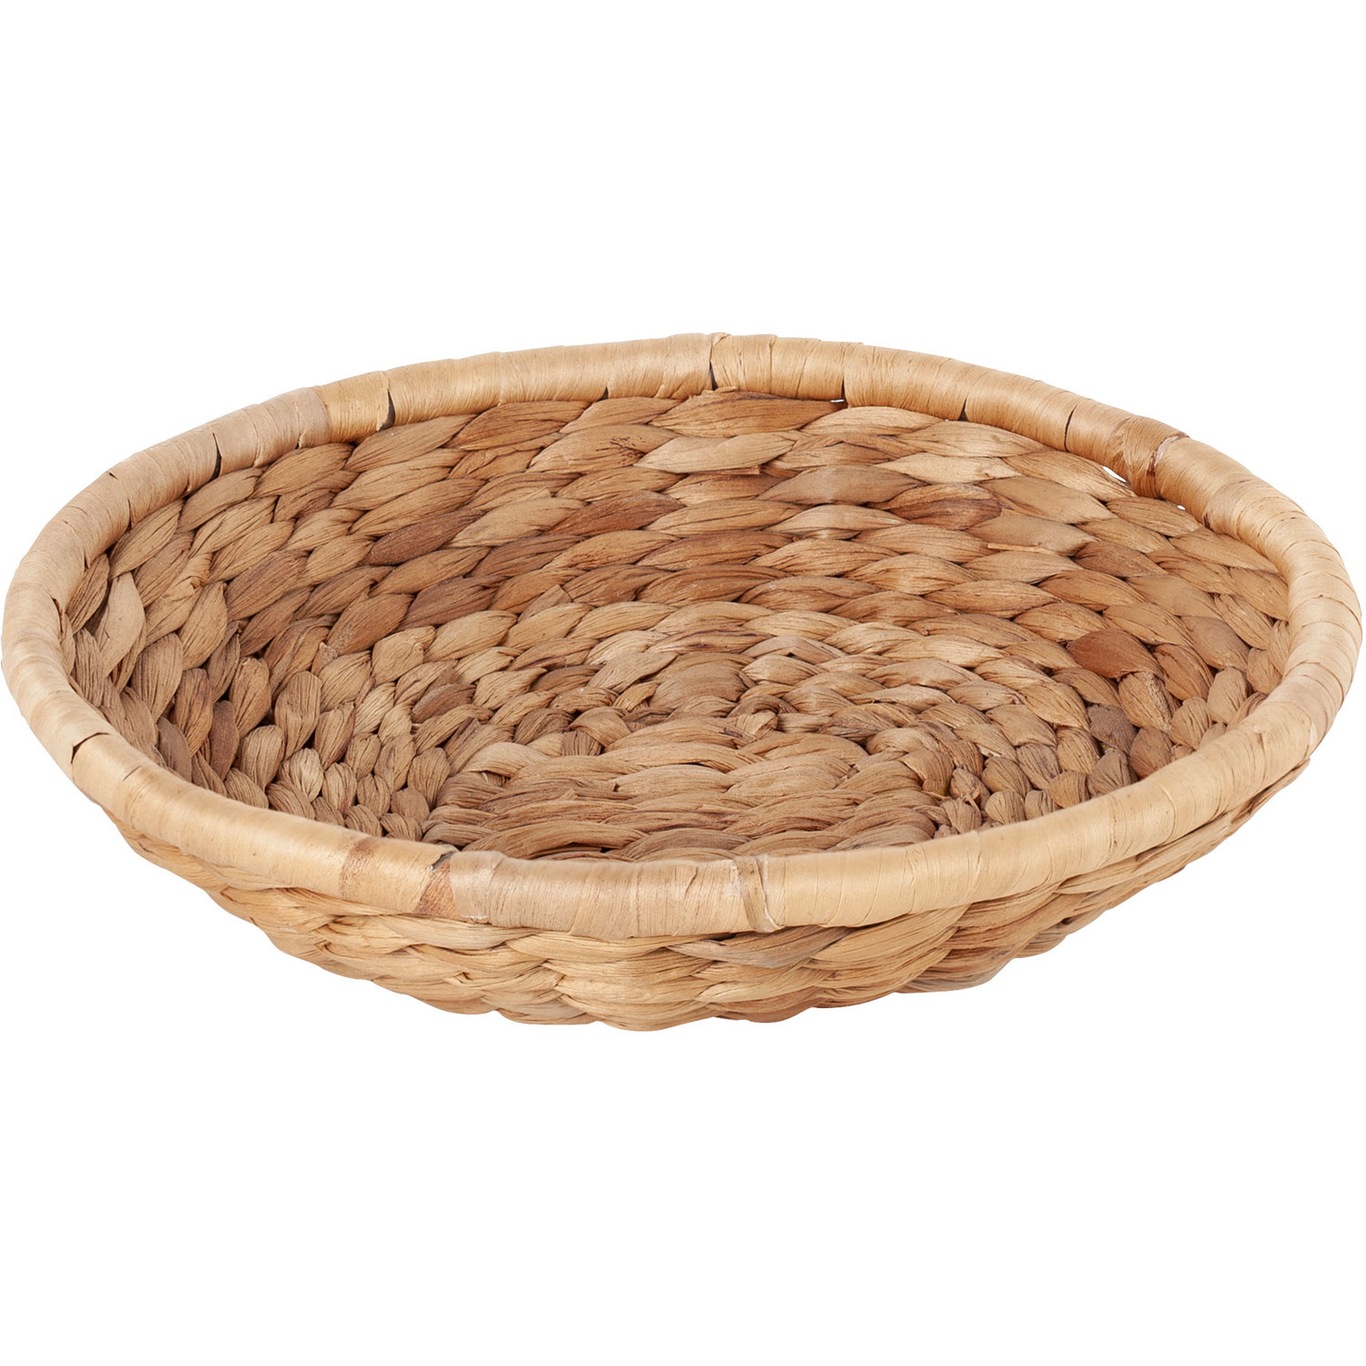 Lily Fruit Bowl, S